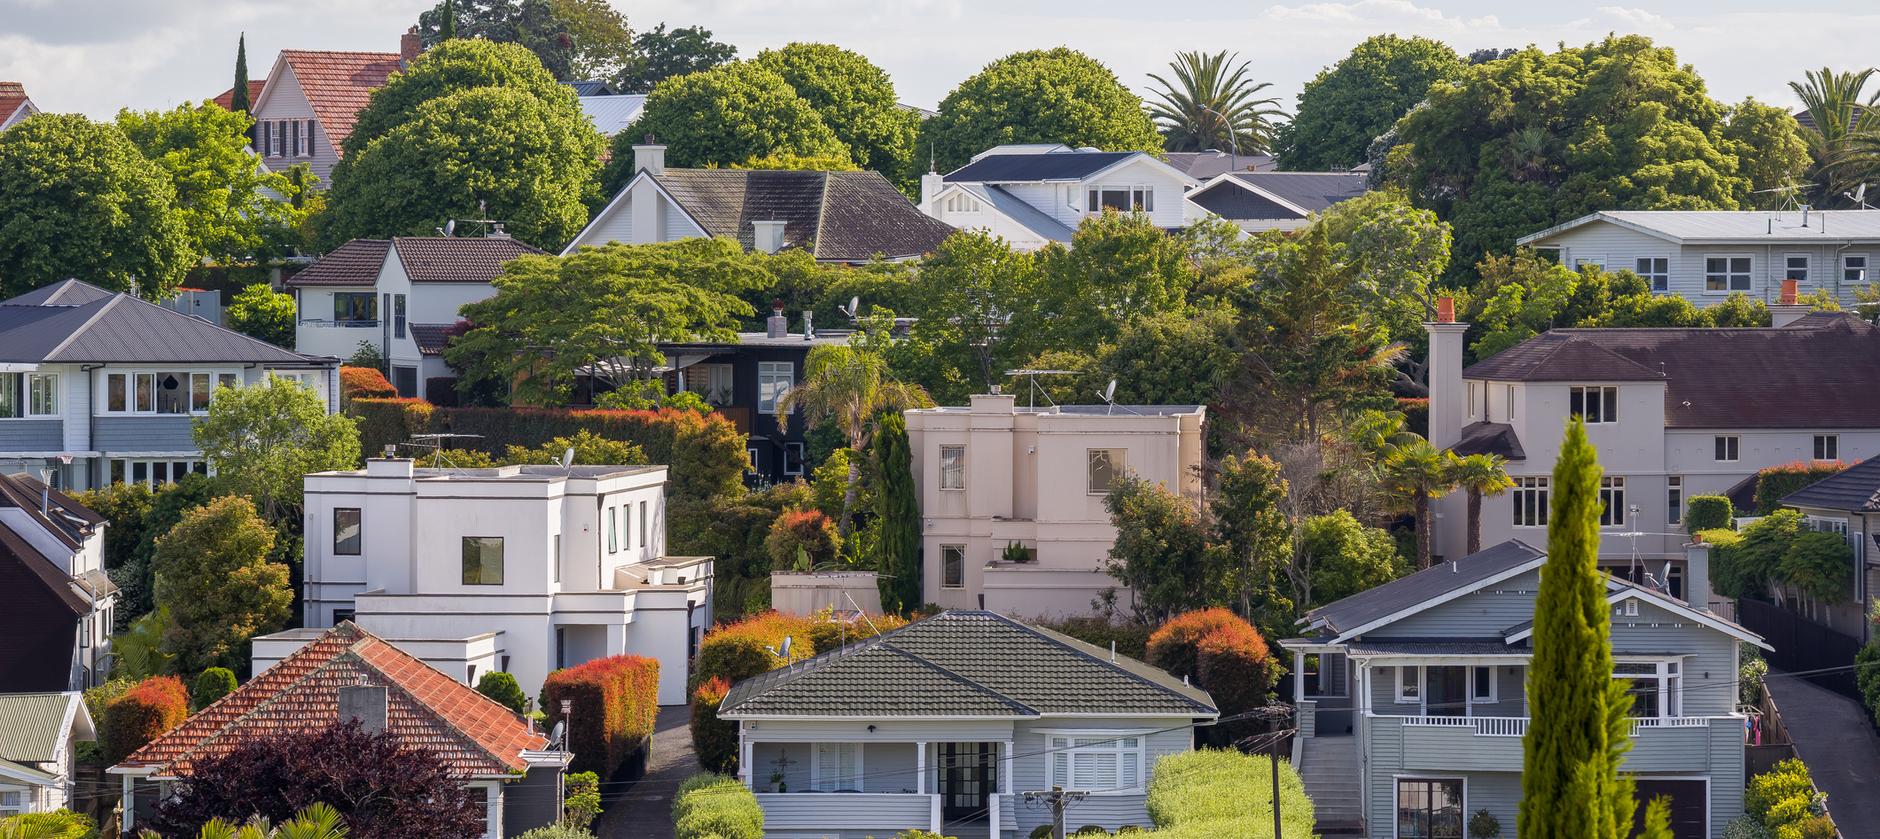 House prices still falling, but at a slower rate